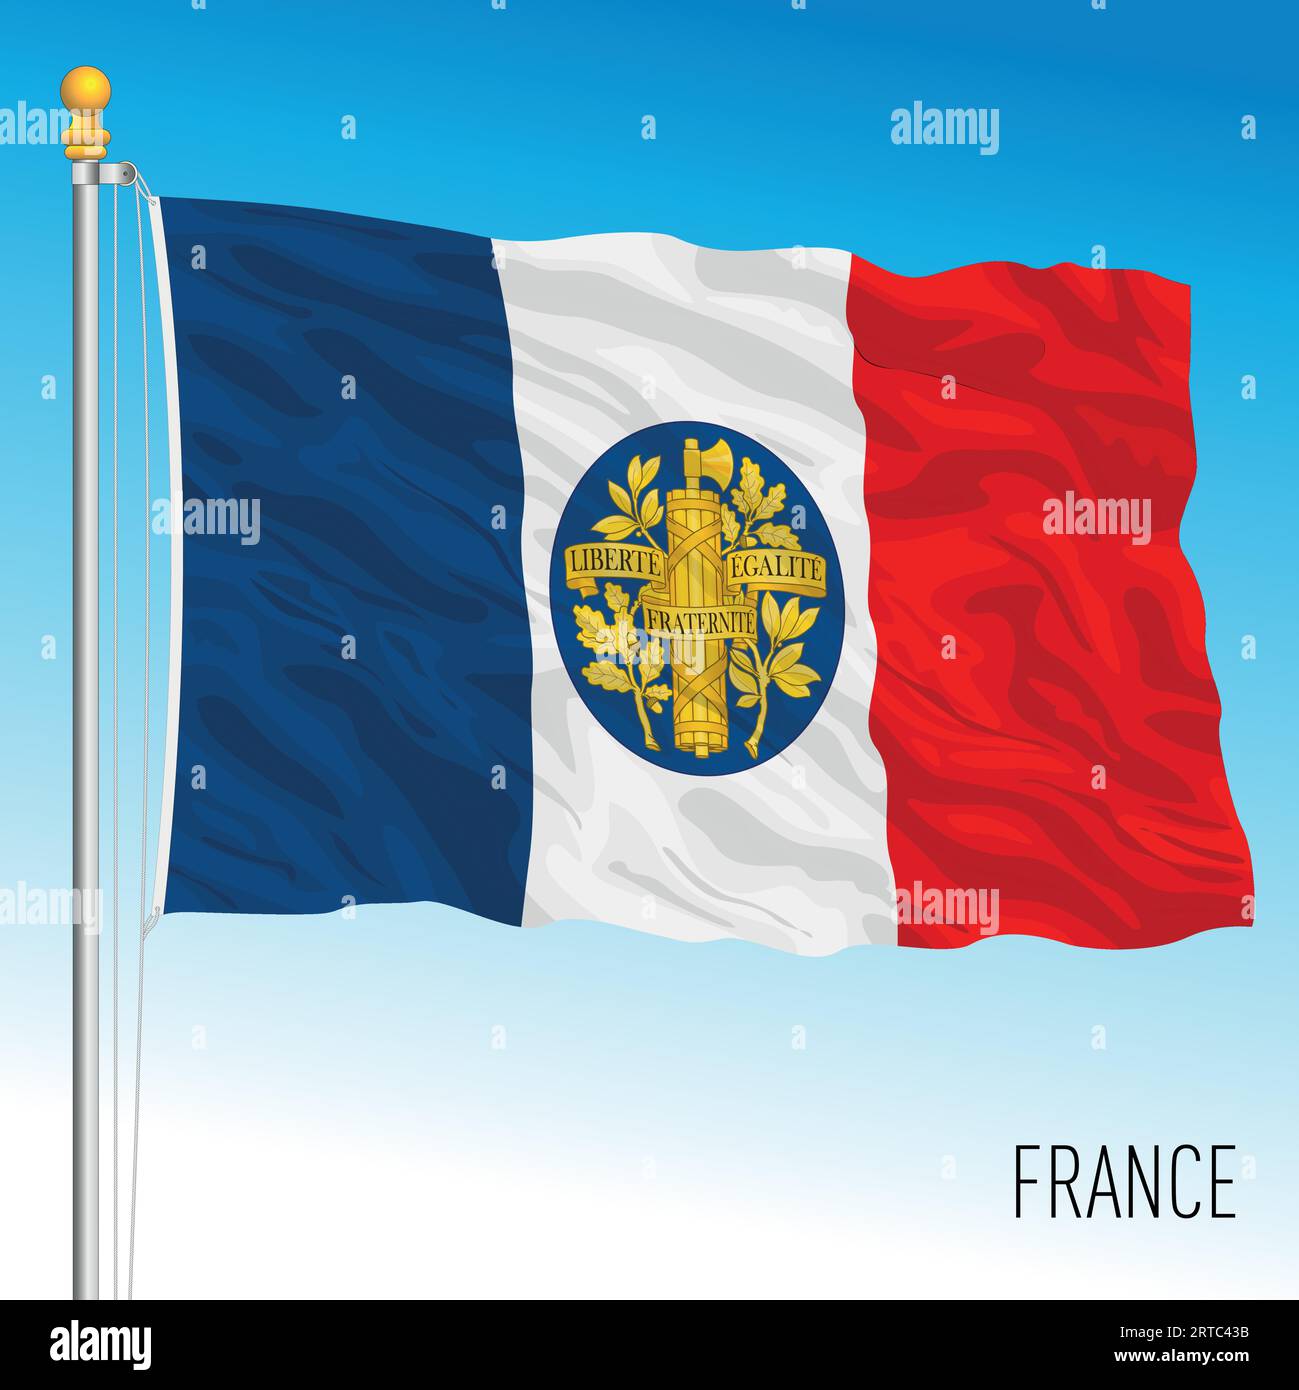 France waving flag with historical french symbol, vector illustration Stock Vector